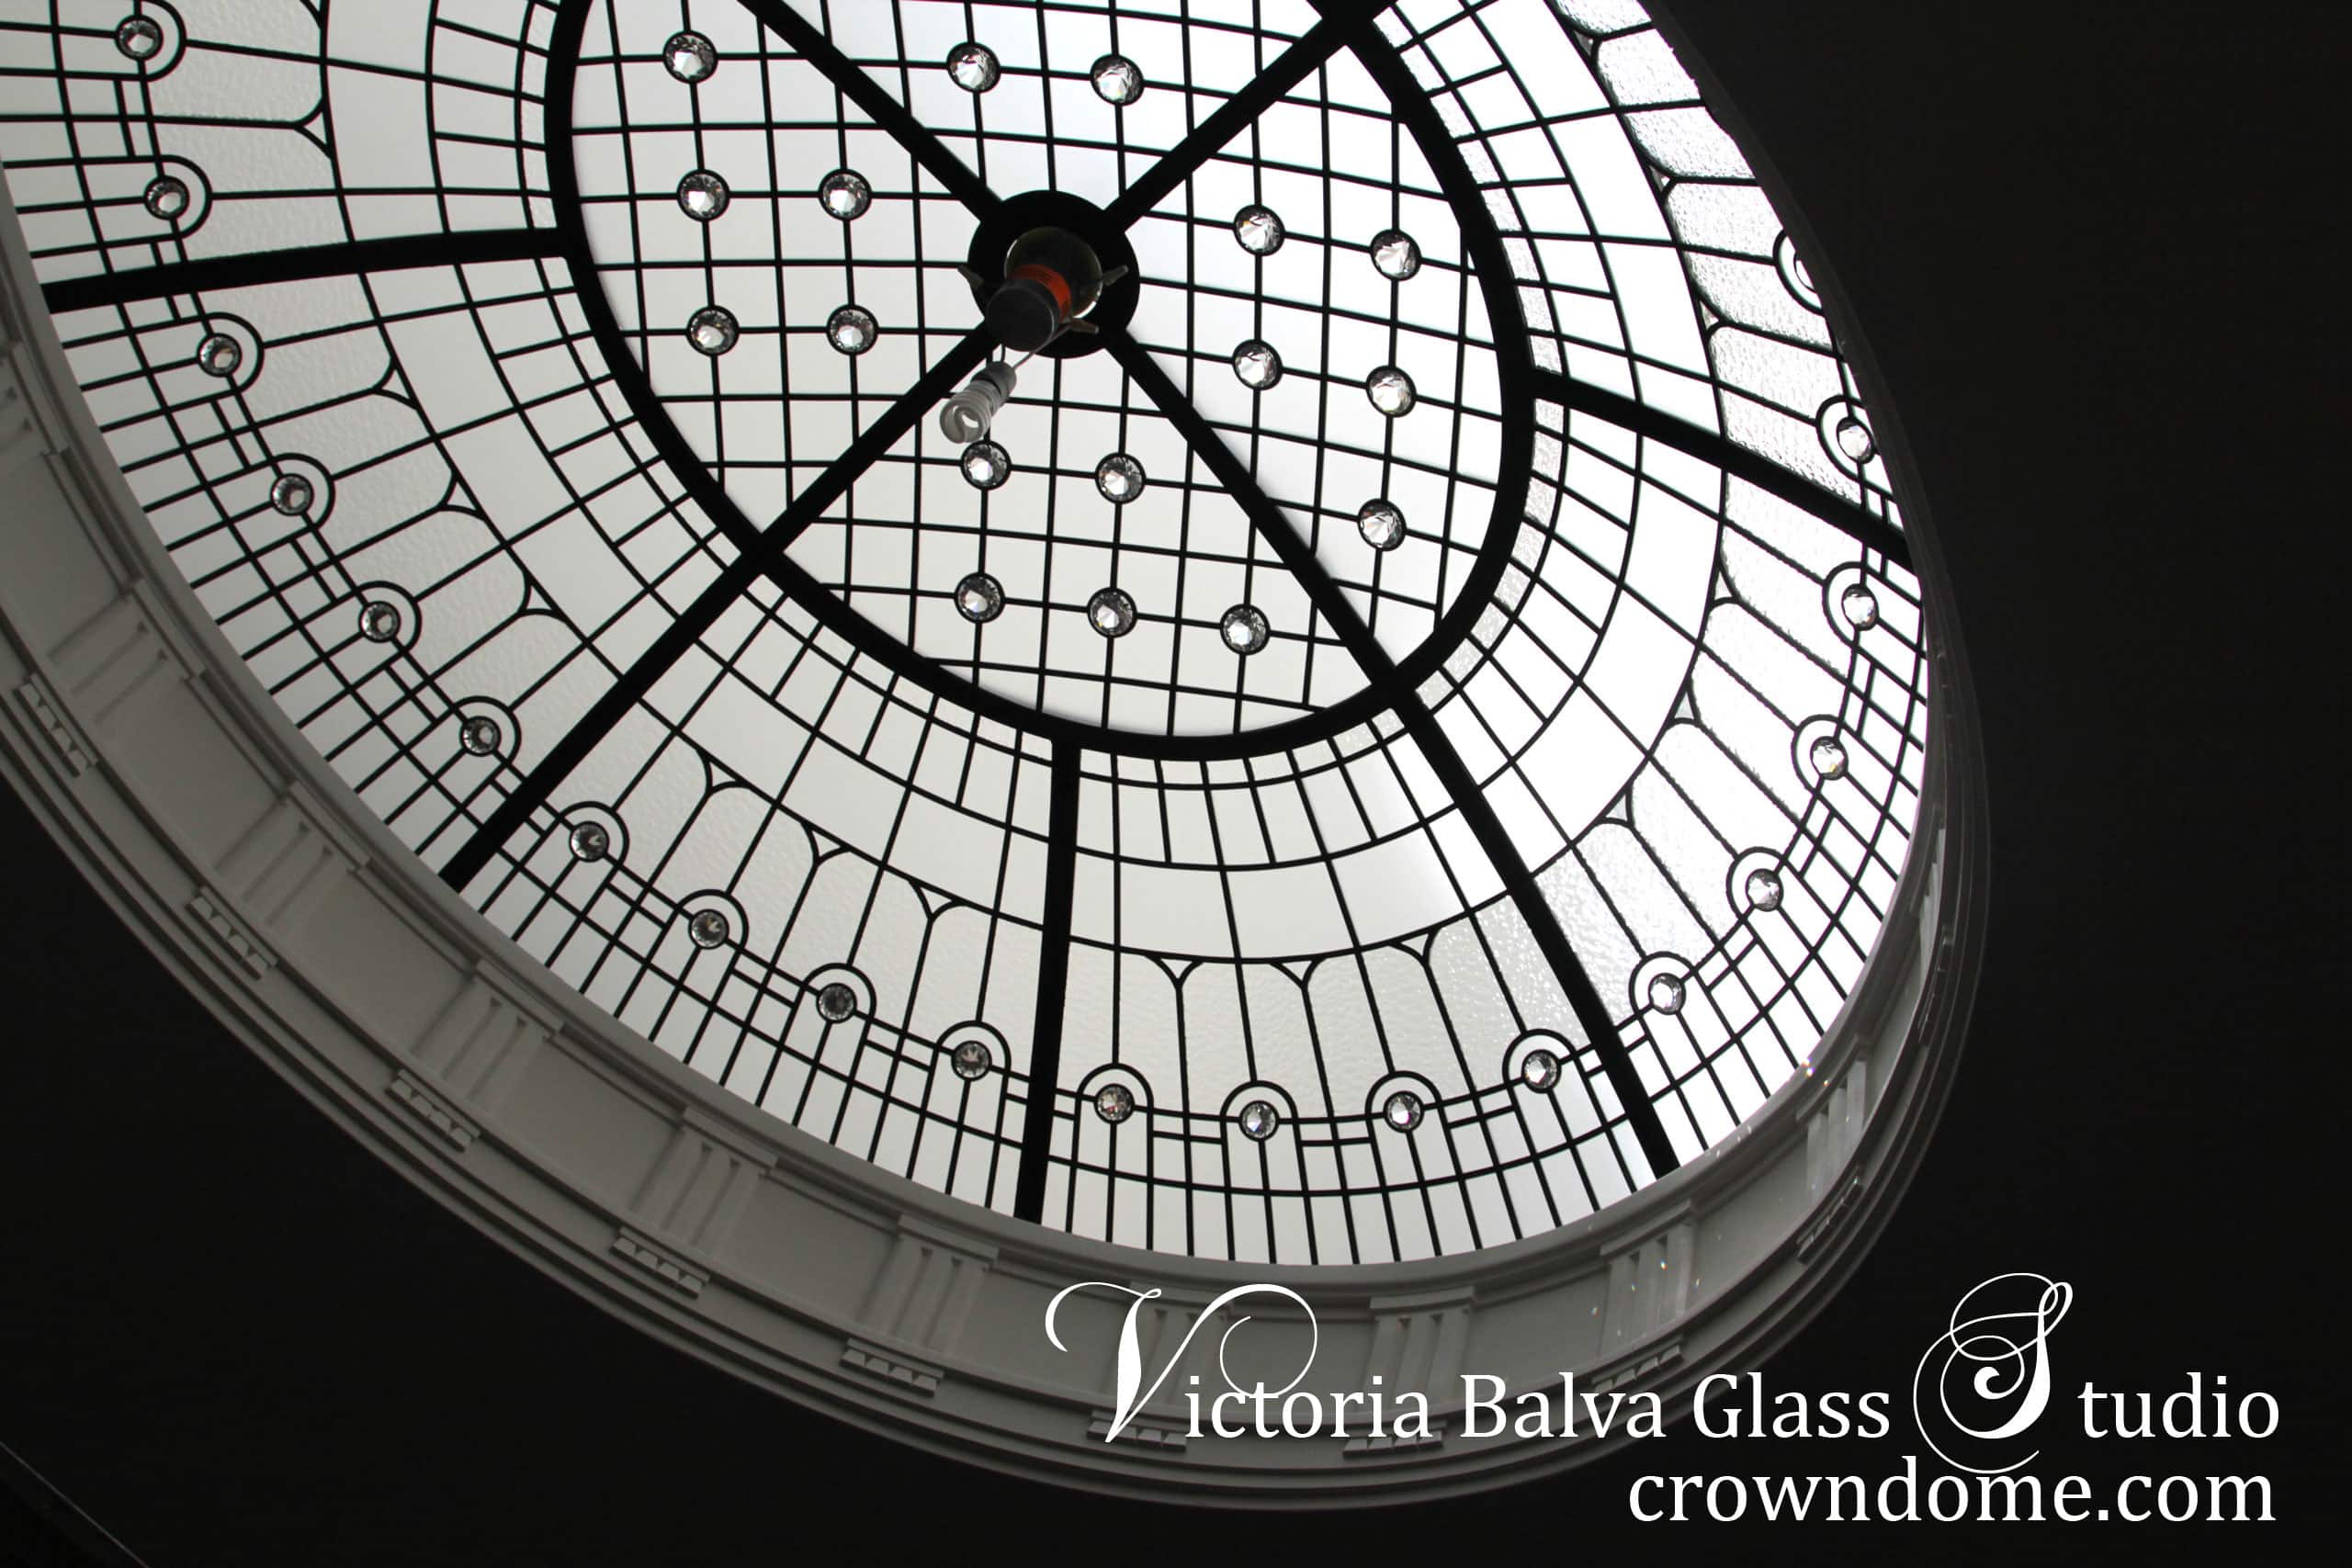 Simple elegant oval leaded glass dome with crystal chandelier hanging from a glass ceiling. Oval leaded glass dome is designed with clear textured glasses, crystal accent jewels in simple and elegant style. Original oval leaded glass dome design by architectural glass artist Victoria Balva